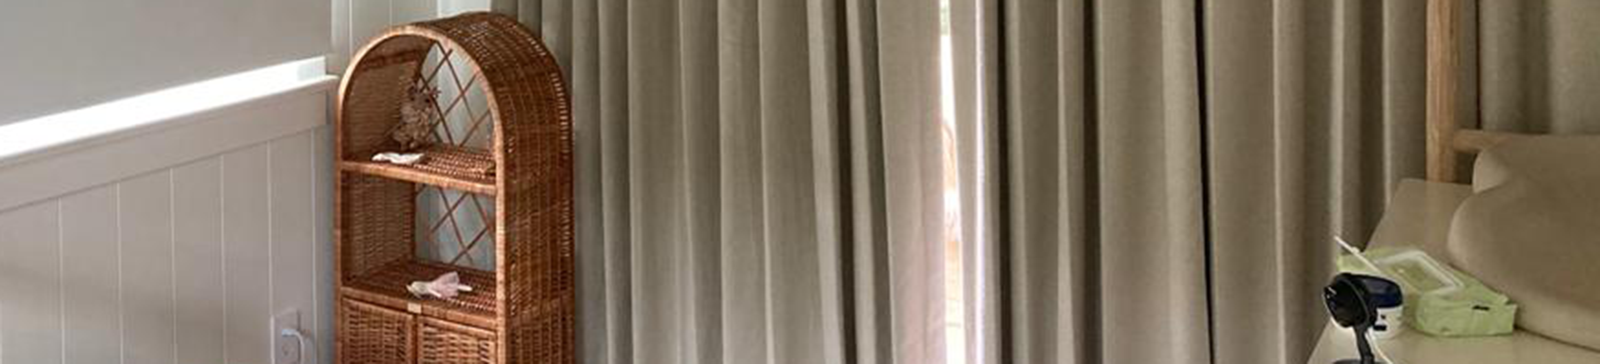 Custom Drapery and Blackout Roller Shades in Castro Valley